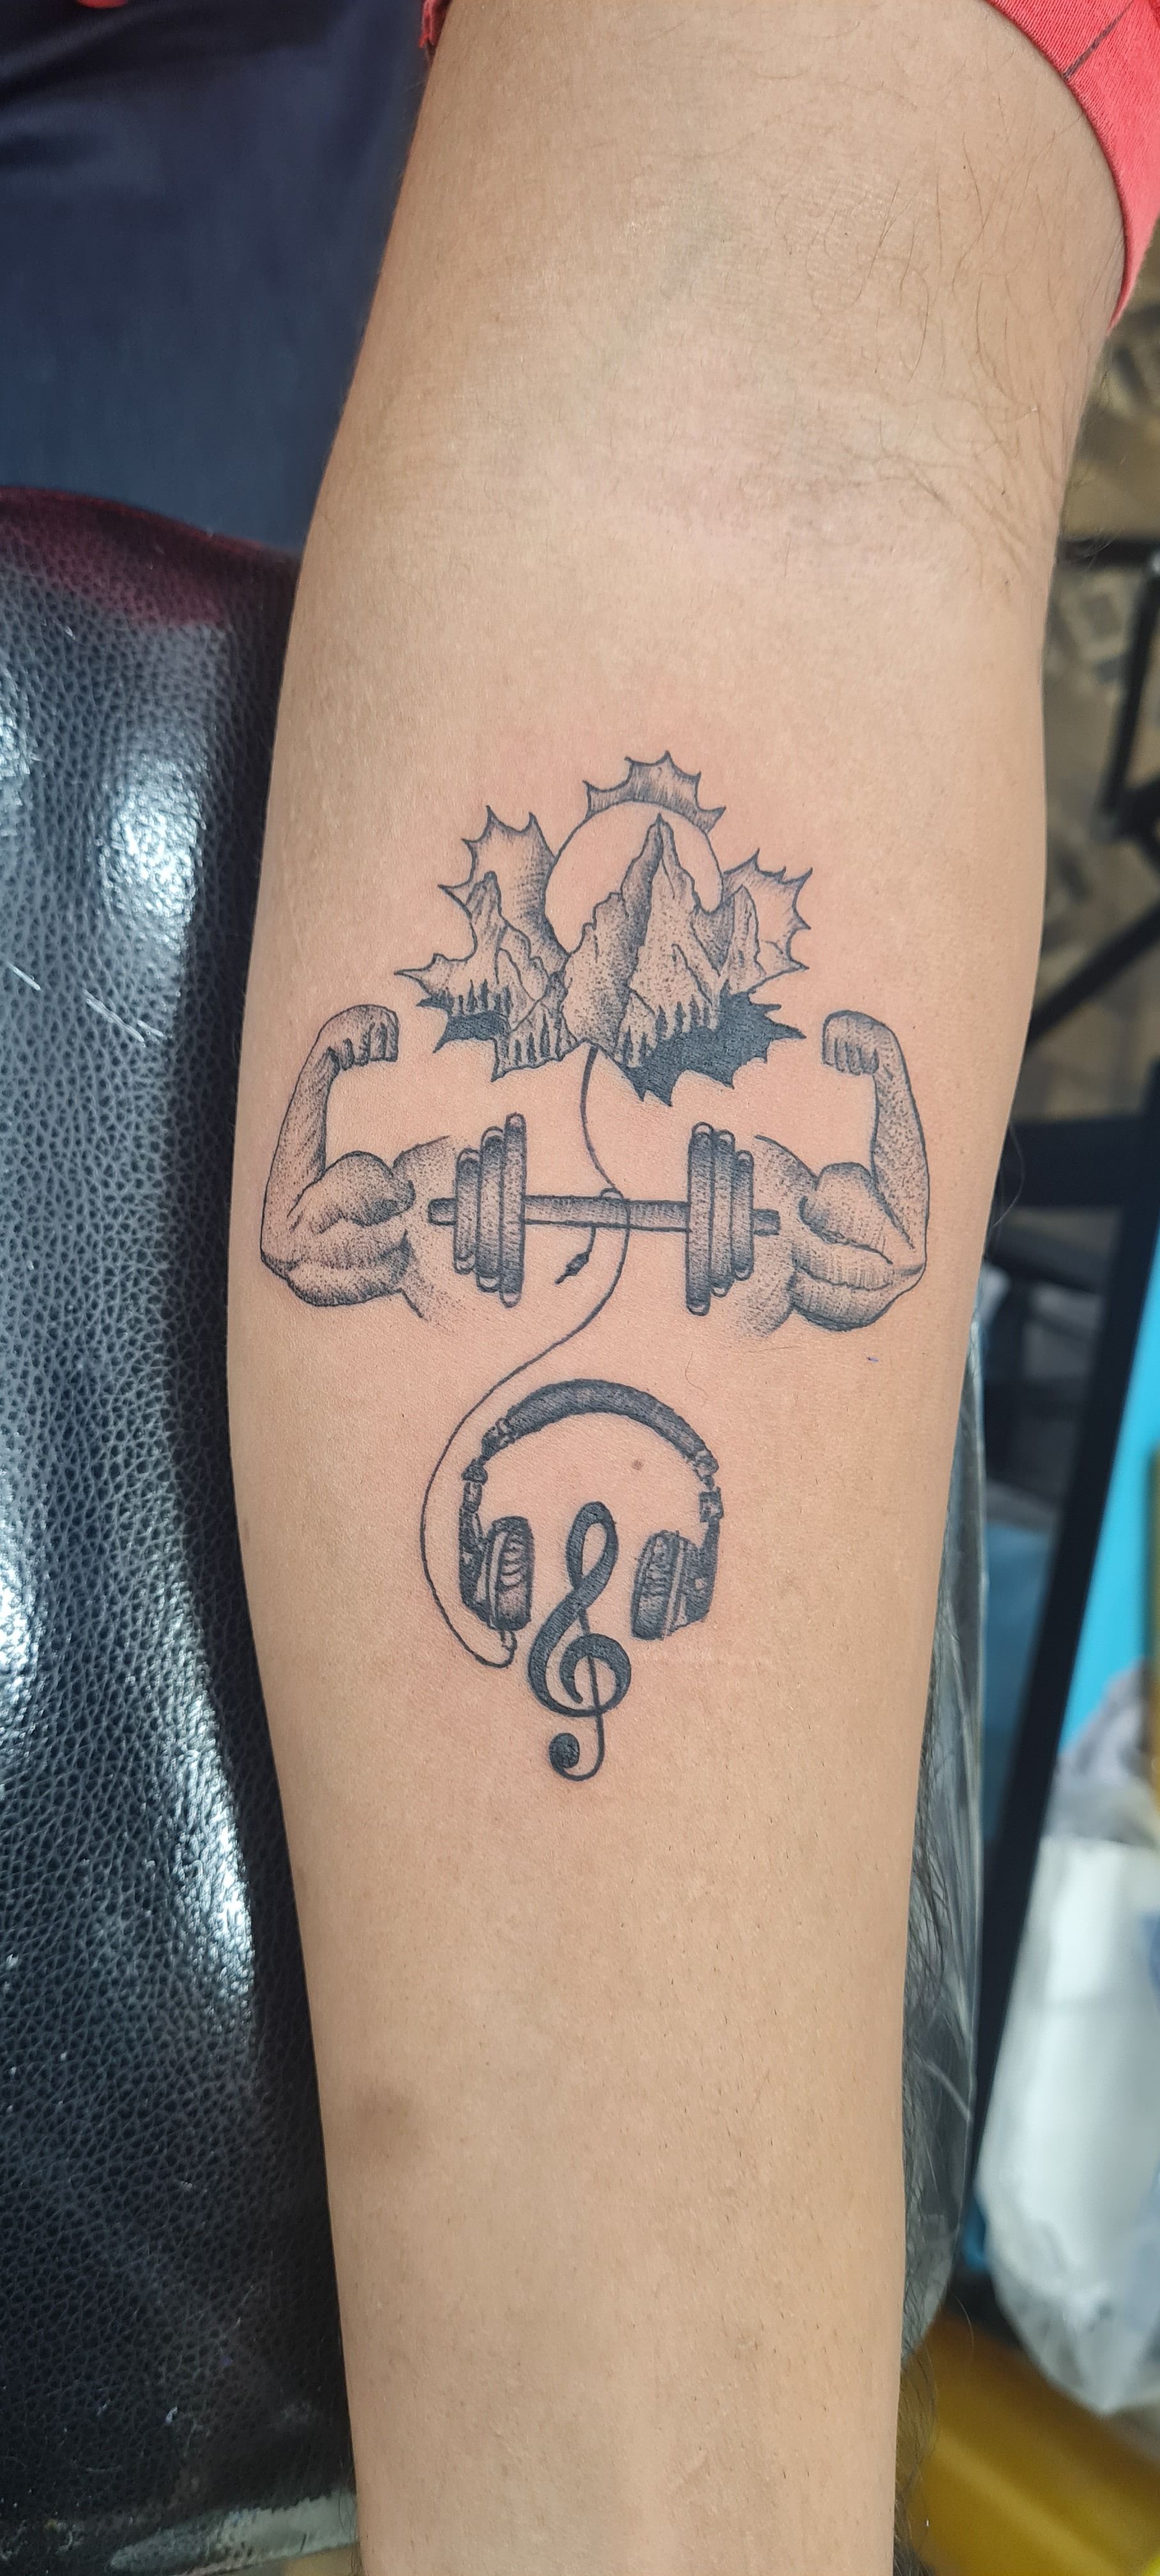 First tattoo aftercare. By when can I go back to the gym? : r/tattooadvice